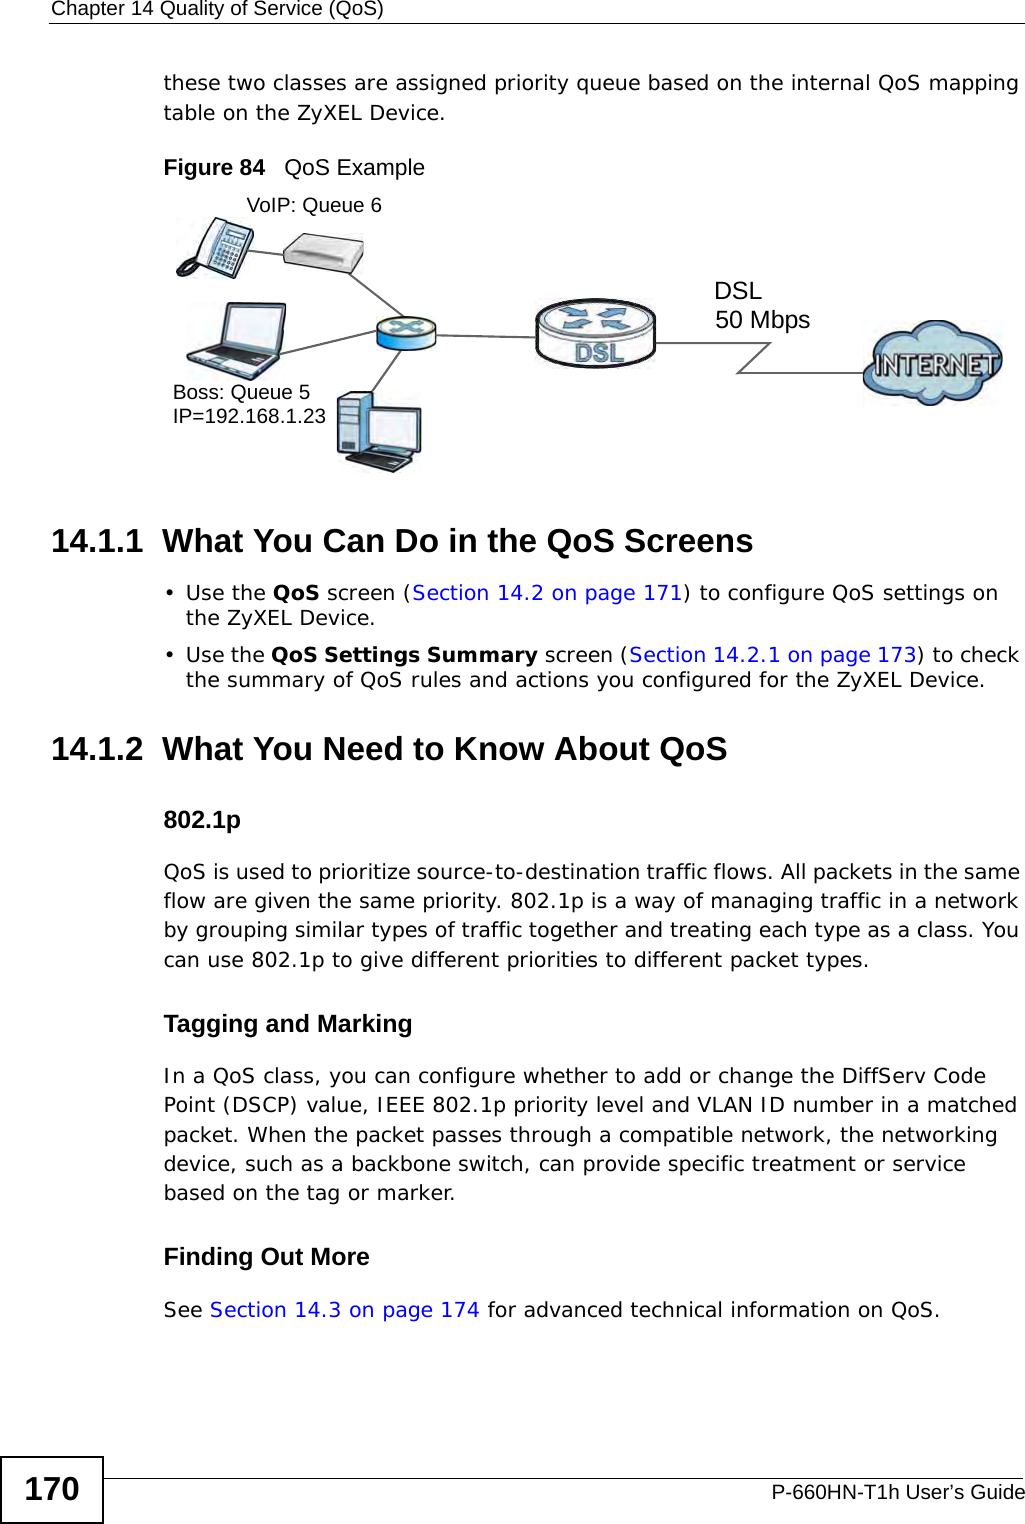 Chapter 14 Quality of Service (QoS)P-660HN-T1h User’s Guide170these two classes are assigned priority queue based on the internal QoS mapping table on the ZyXEL Device.Figure 84   QoS Example14.1.1  What You Can Do in the QoS Screens•Use the QoS screen (Section 14.2 on page 171) to configure QoS settings on the ZyXEL Device.•Use the QoS Settings Summary screen (Section 14.2.1 on page 173) to check the summary of QoS rules and actions you configured for the ZyXEL Device.14.1.2  What You Need to Know About QoS802.1pQoS is used to prioritize source-to-destination traffic flows. All packets in the same flow are given the same priority. 802.1p is a way of managing traffic in a network by grouping similar types of traffic together and treating each type as a class. You can use 802.1p to give different priorities to different packet types. Tagging and MarkingIn a QoS class, you can configure whether to add or change the DiffServ Code Point (DSCP) value, IEEE 802.1p priority level and VLAN ID number in a matched packet. When the packet passes through a compatible network, the networking device, such as a backbone switch, can provide specific treatment or service based on the tag or marker.Finding Out MoreSee Section 14.3 on page 174 for advanced technical information on QoS.50 MbpsDSLVoIP: Queue 6Boss: Queue 5IP=192.168.1.23